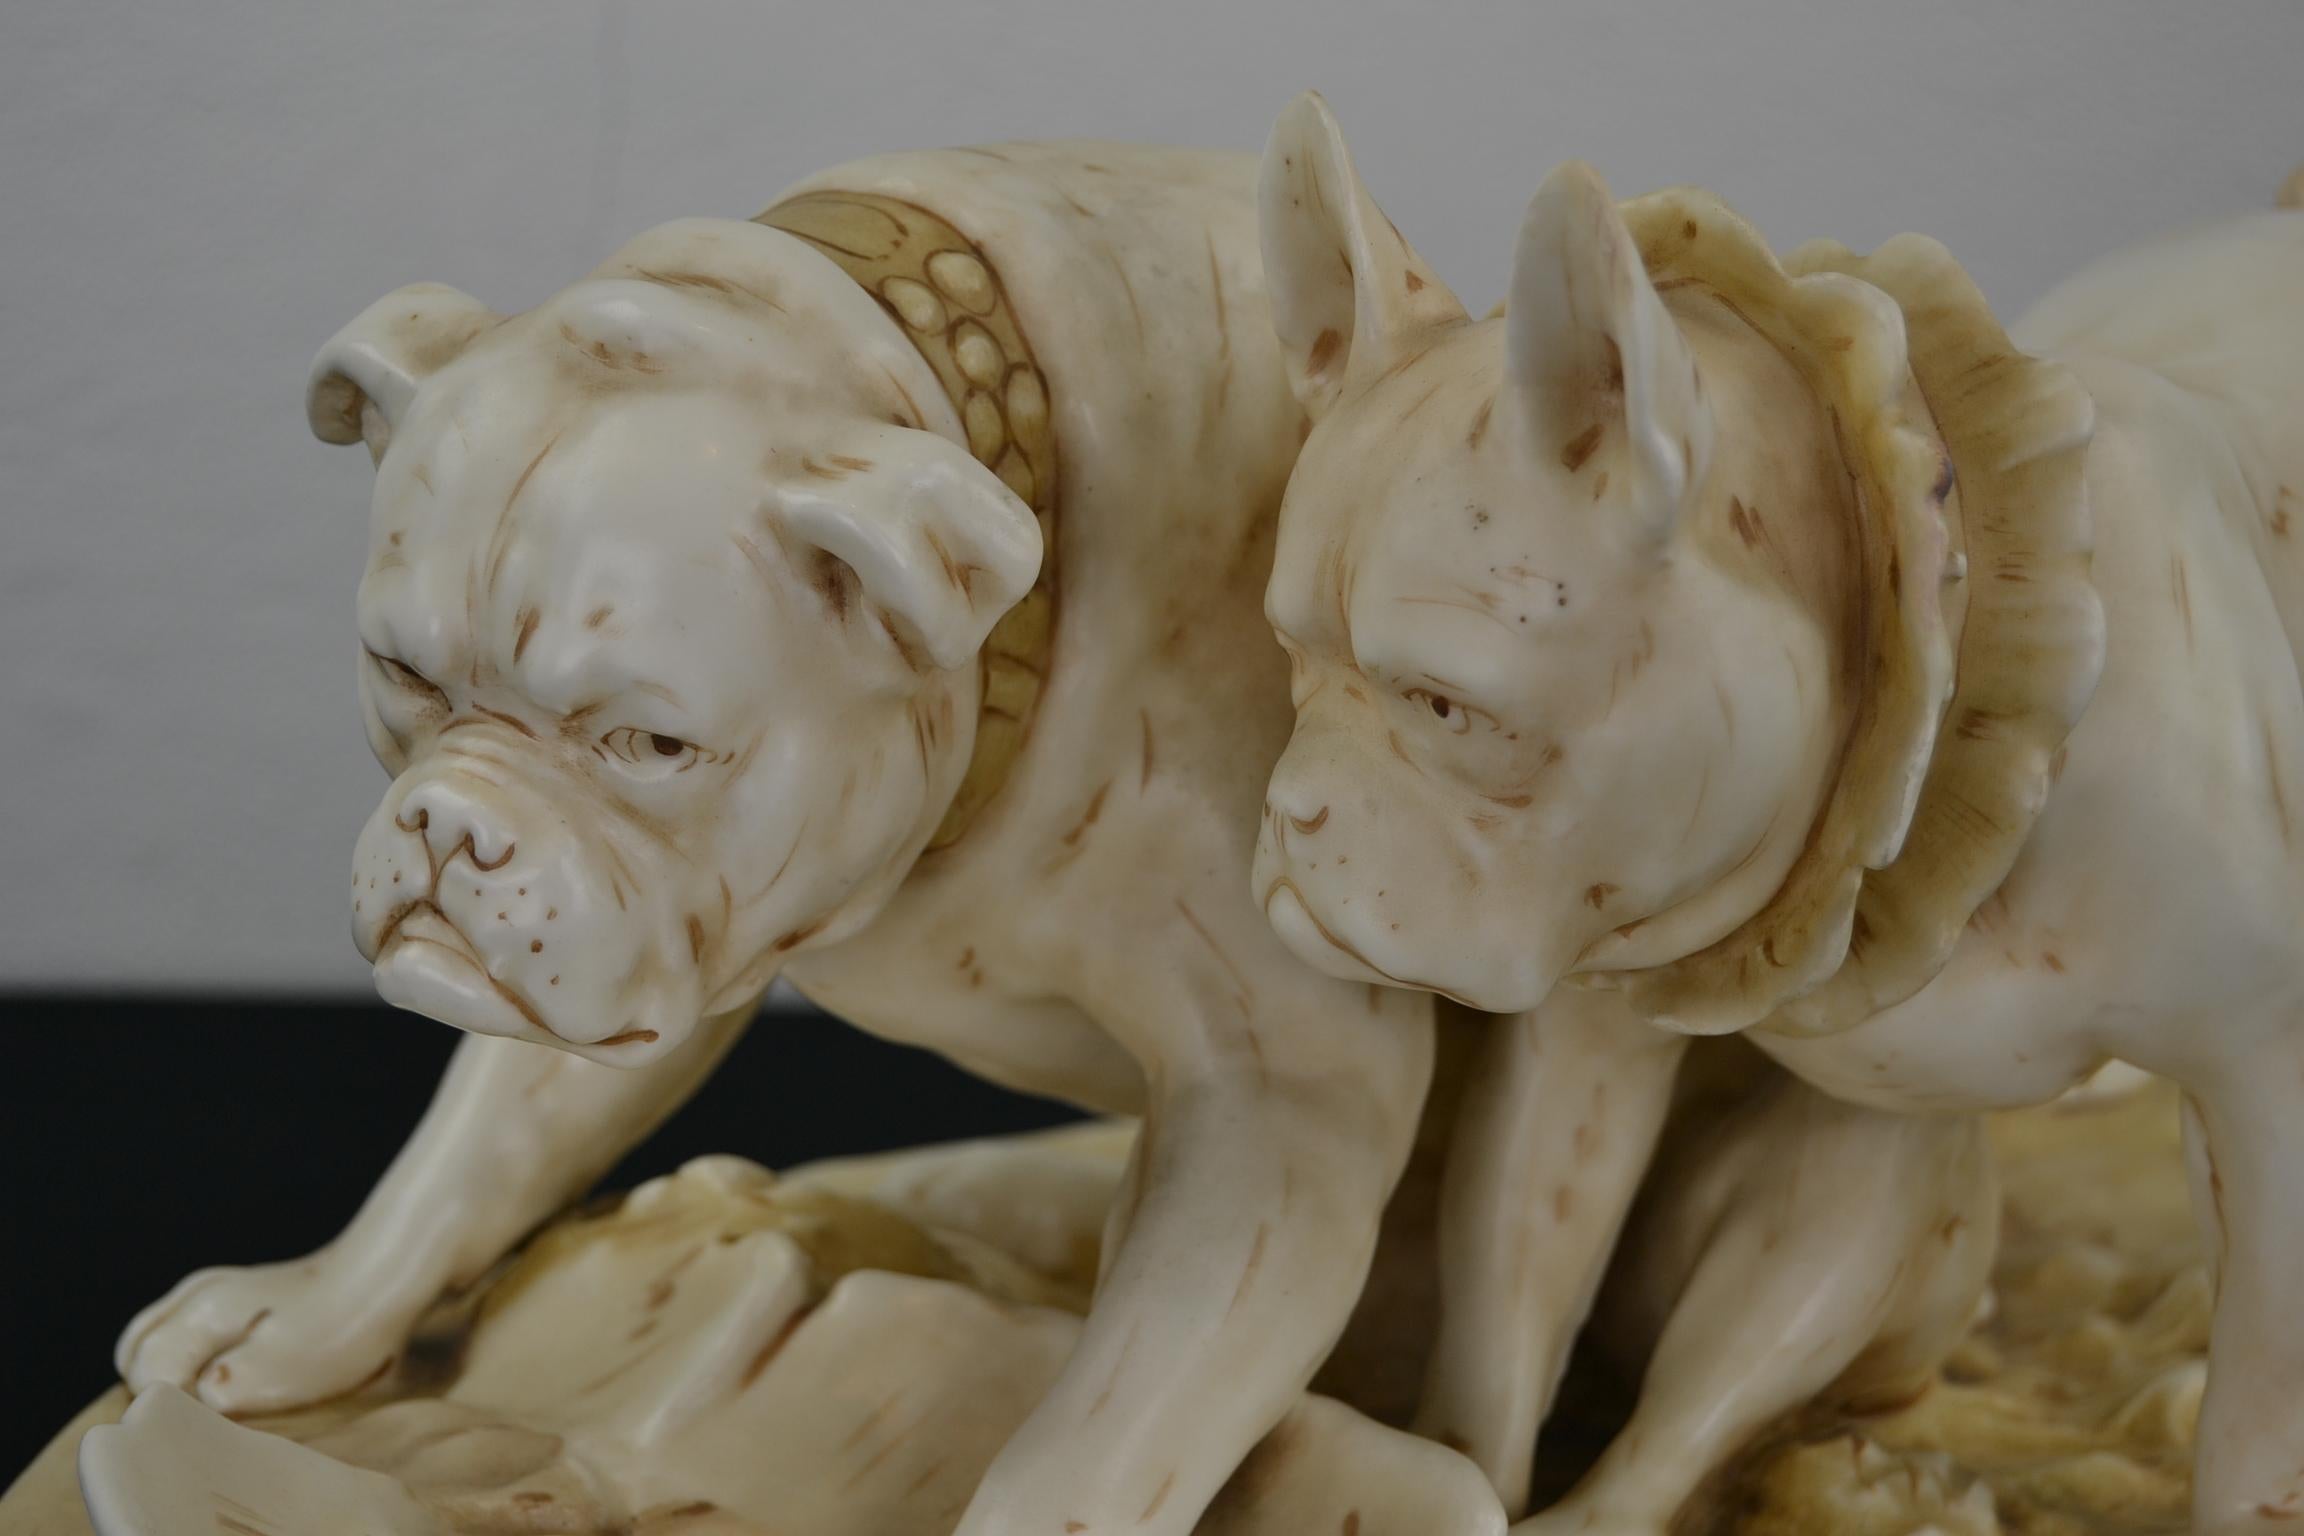 Czech Antique Group of Bulldog, French and English Bulldog Sculpture